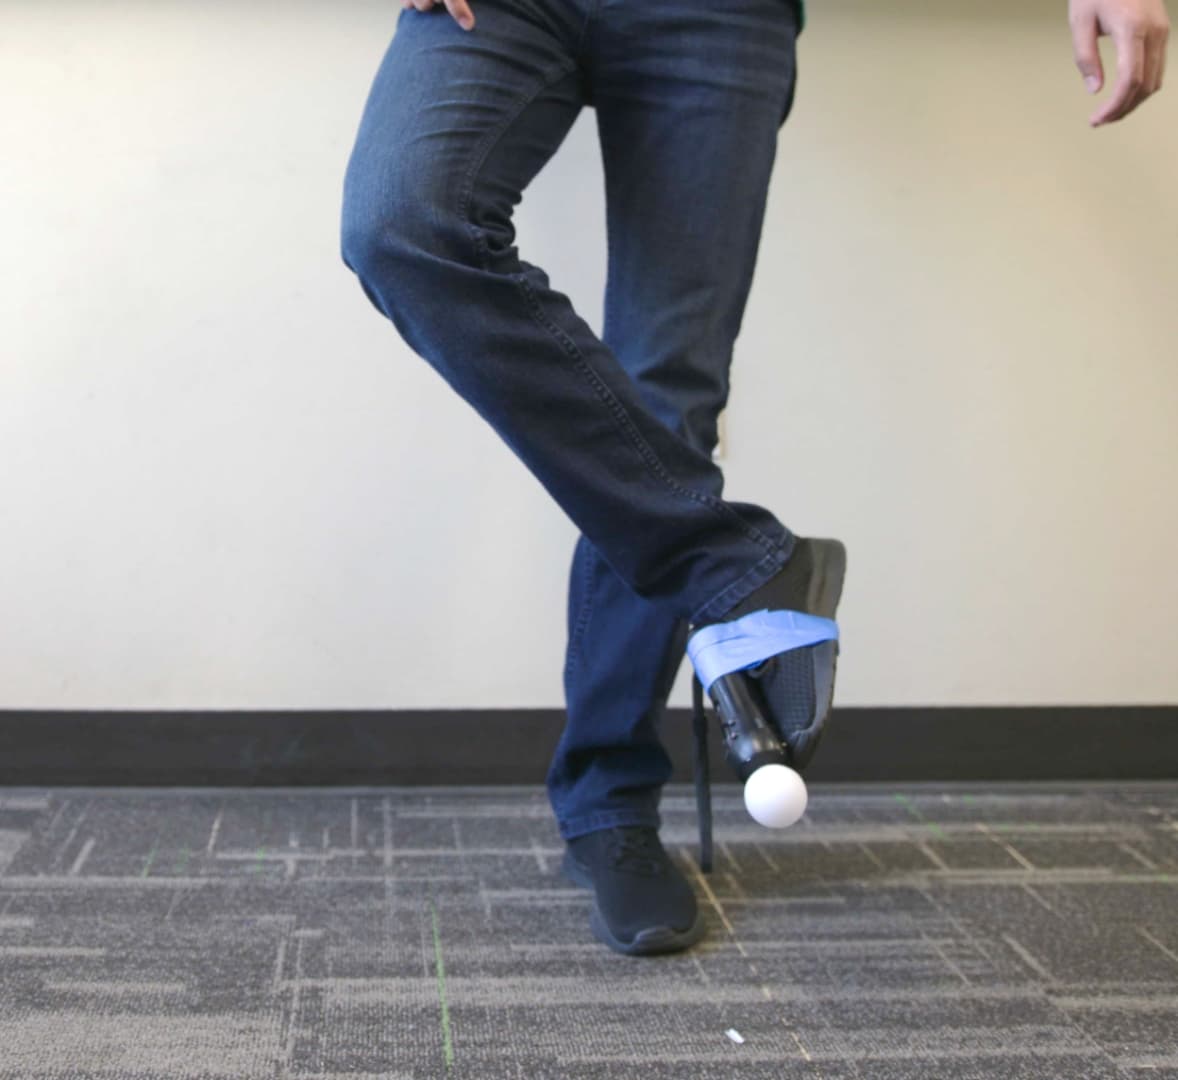 A foot wearing a shoe with a PlayStation Move motion controller taped to it. The leg is being swung to the user's left.